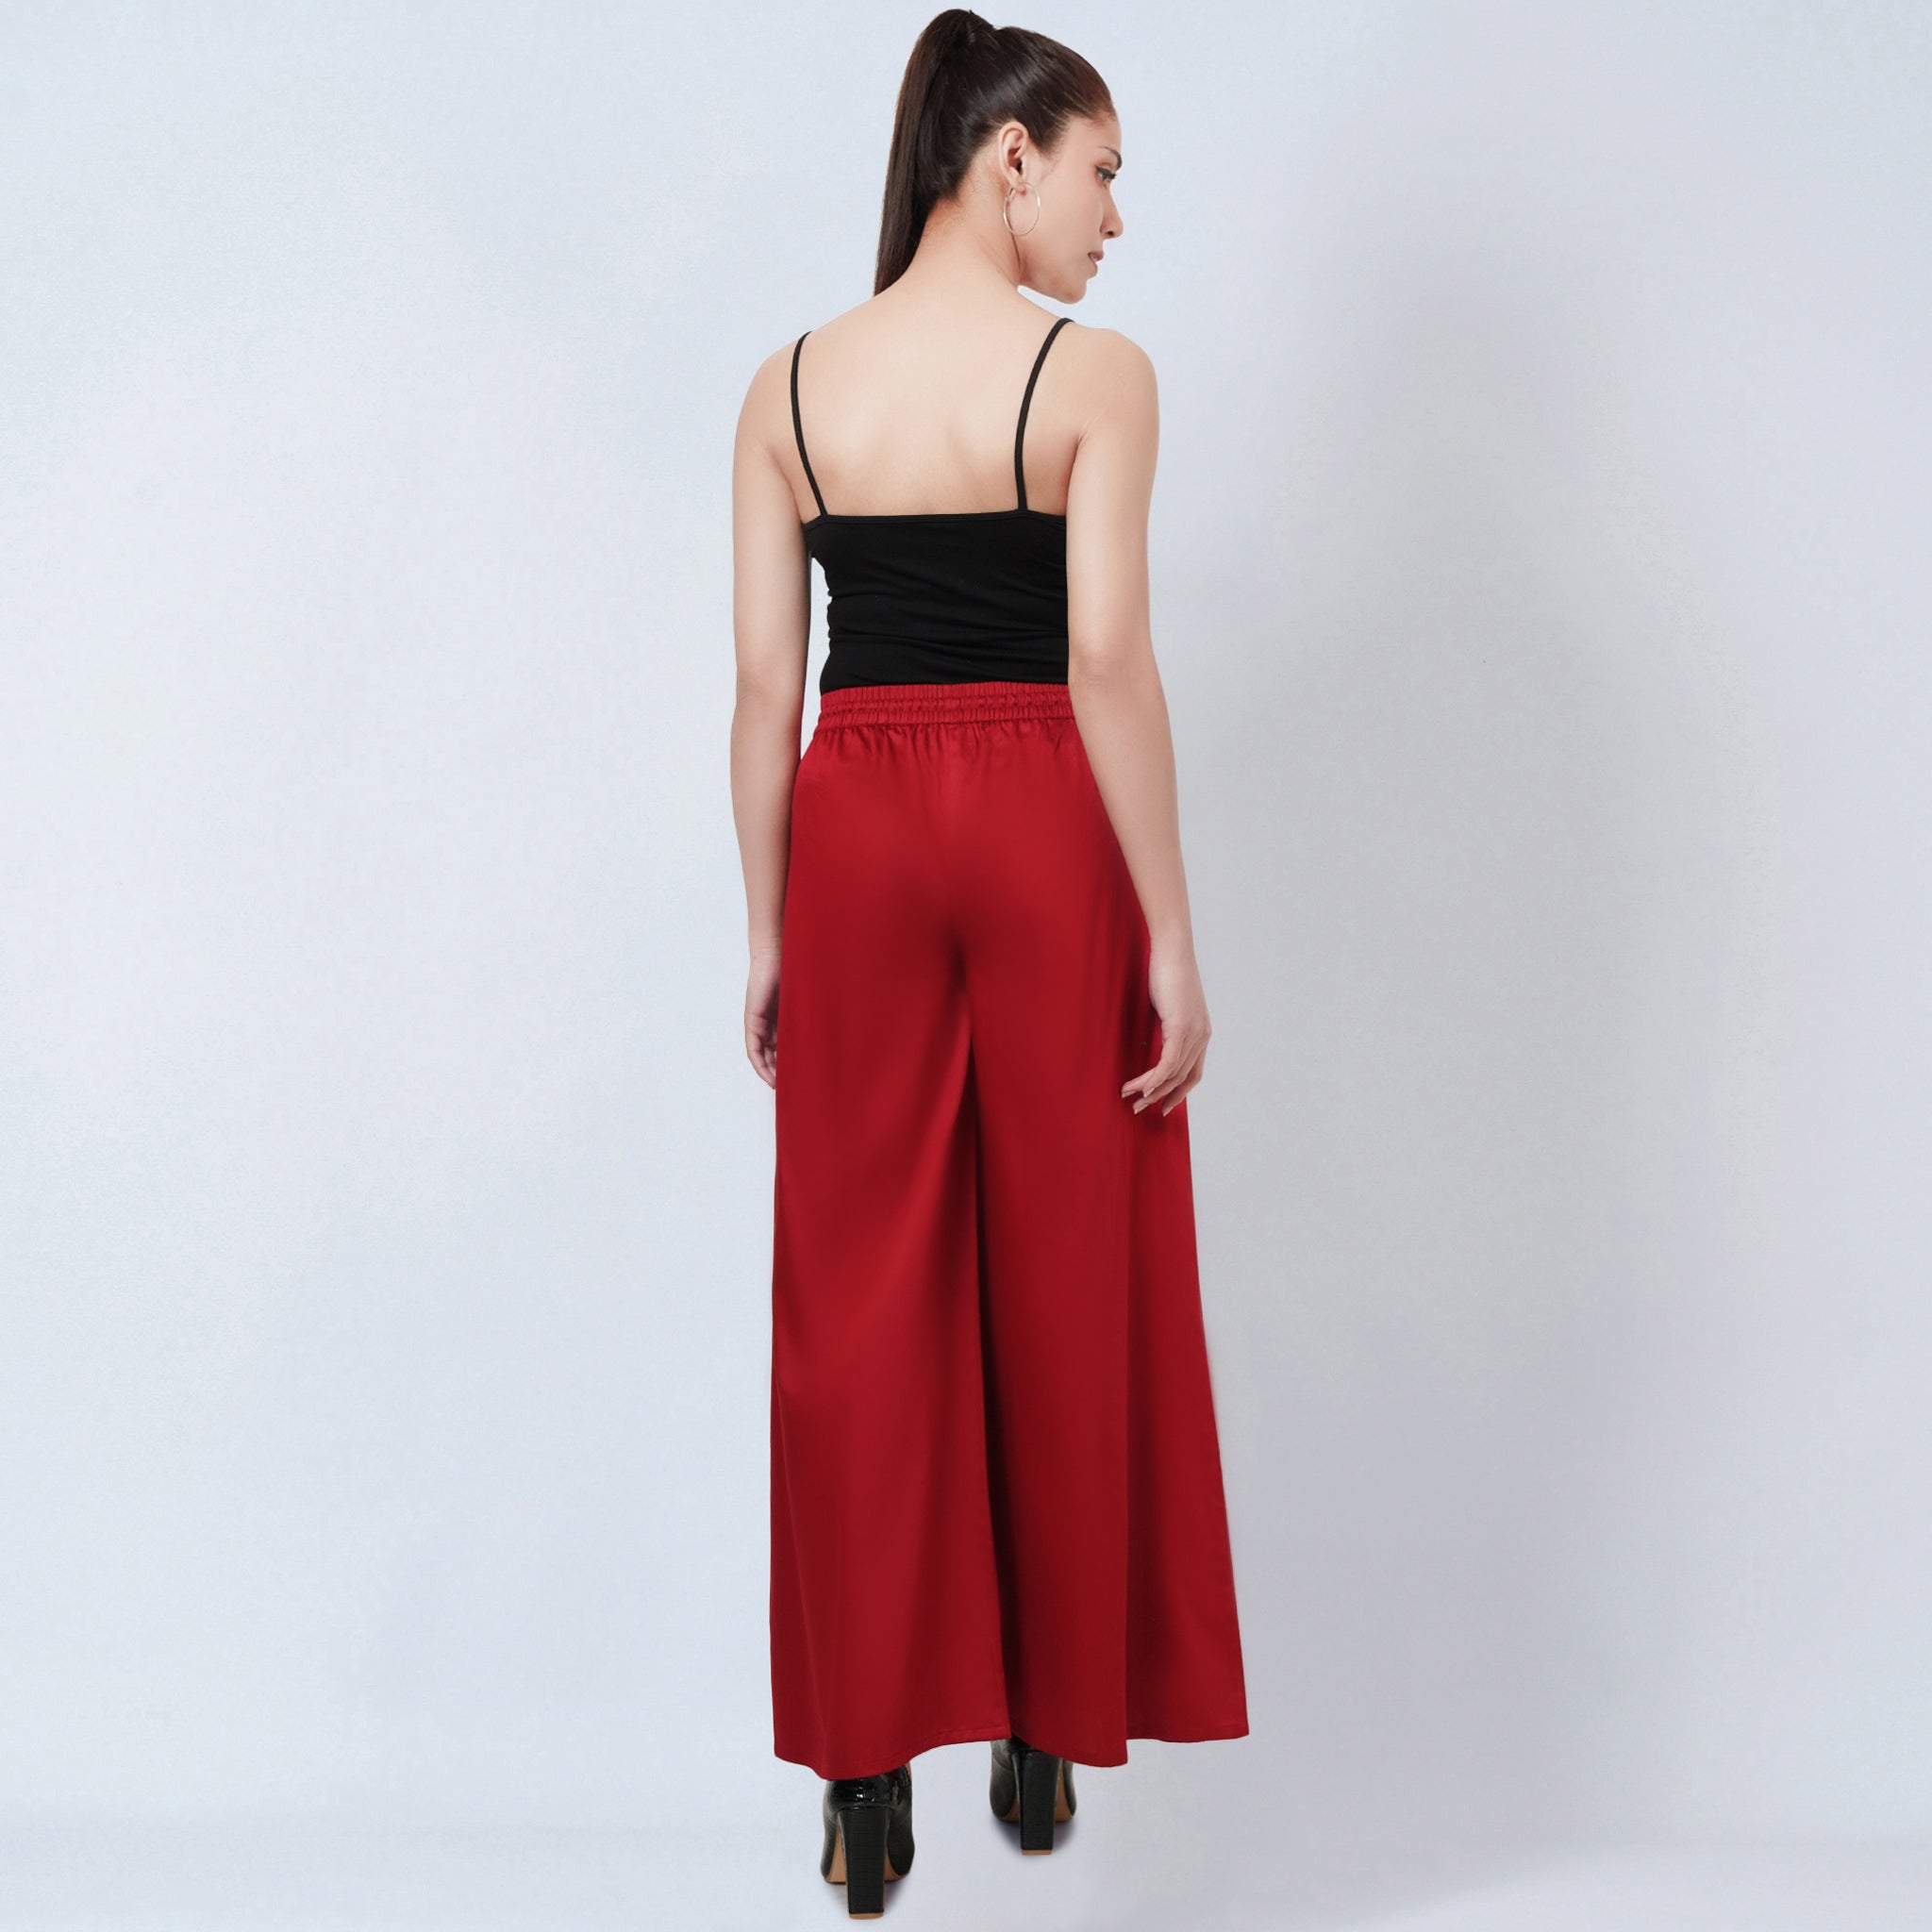 Buy Red Solid Palazzos Online - W for Woman